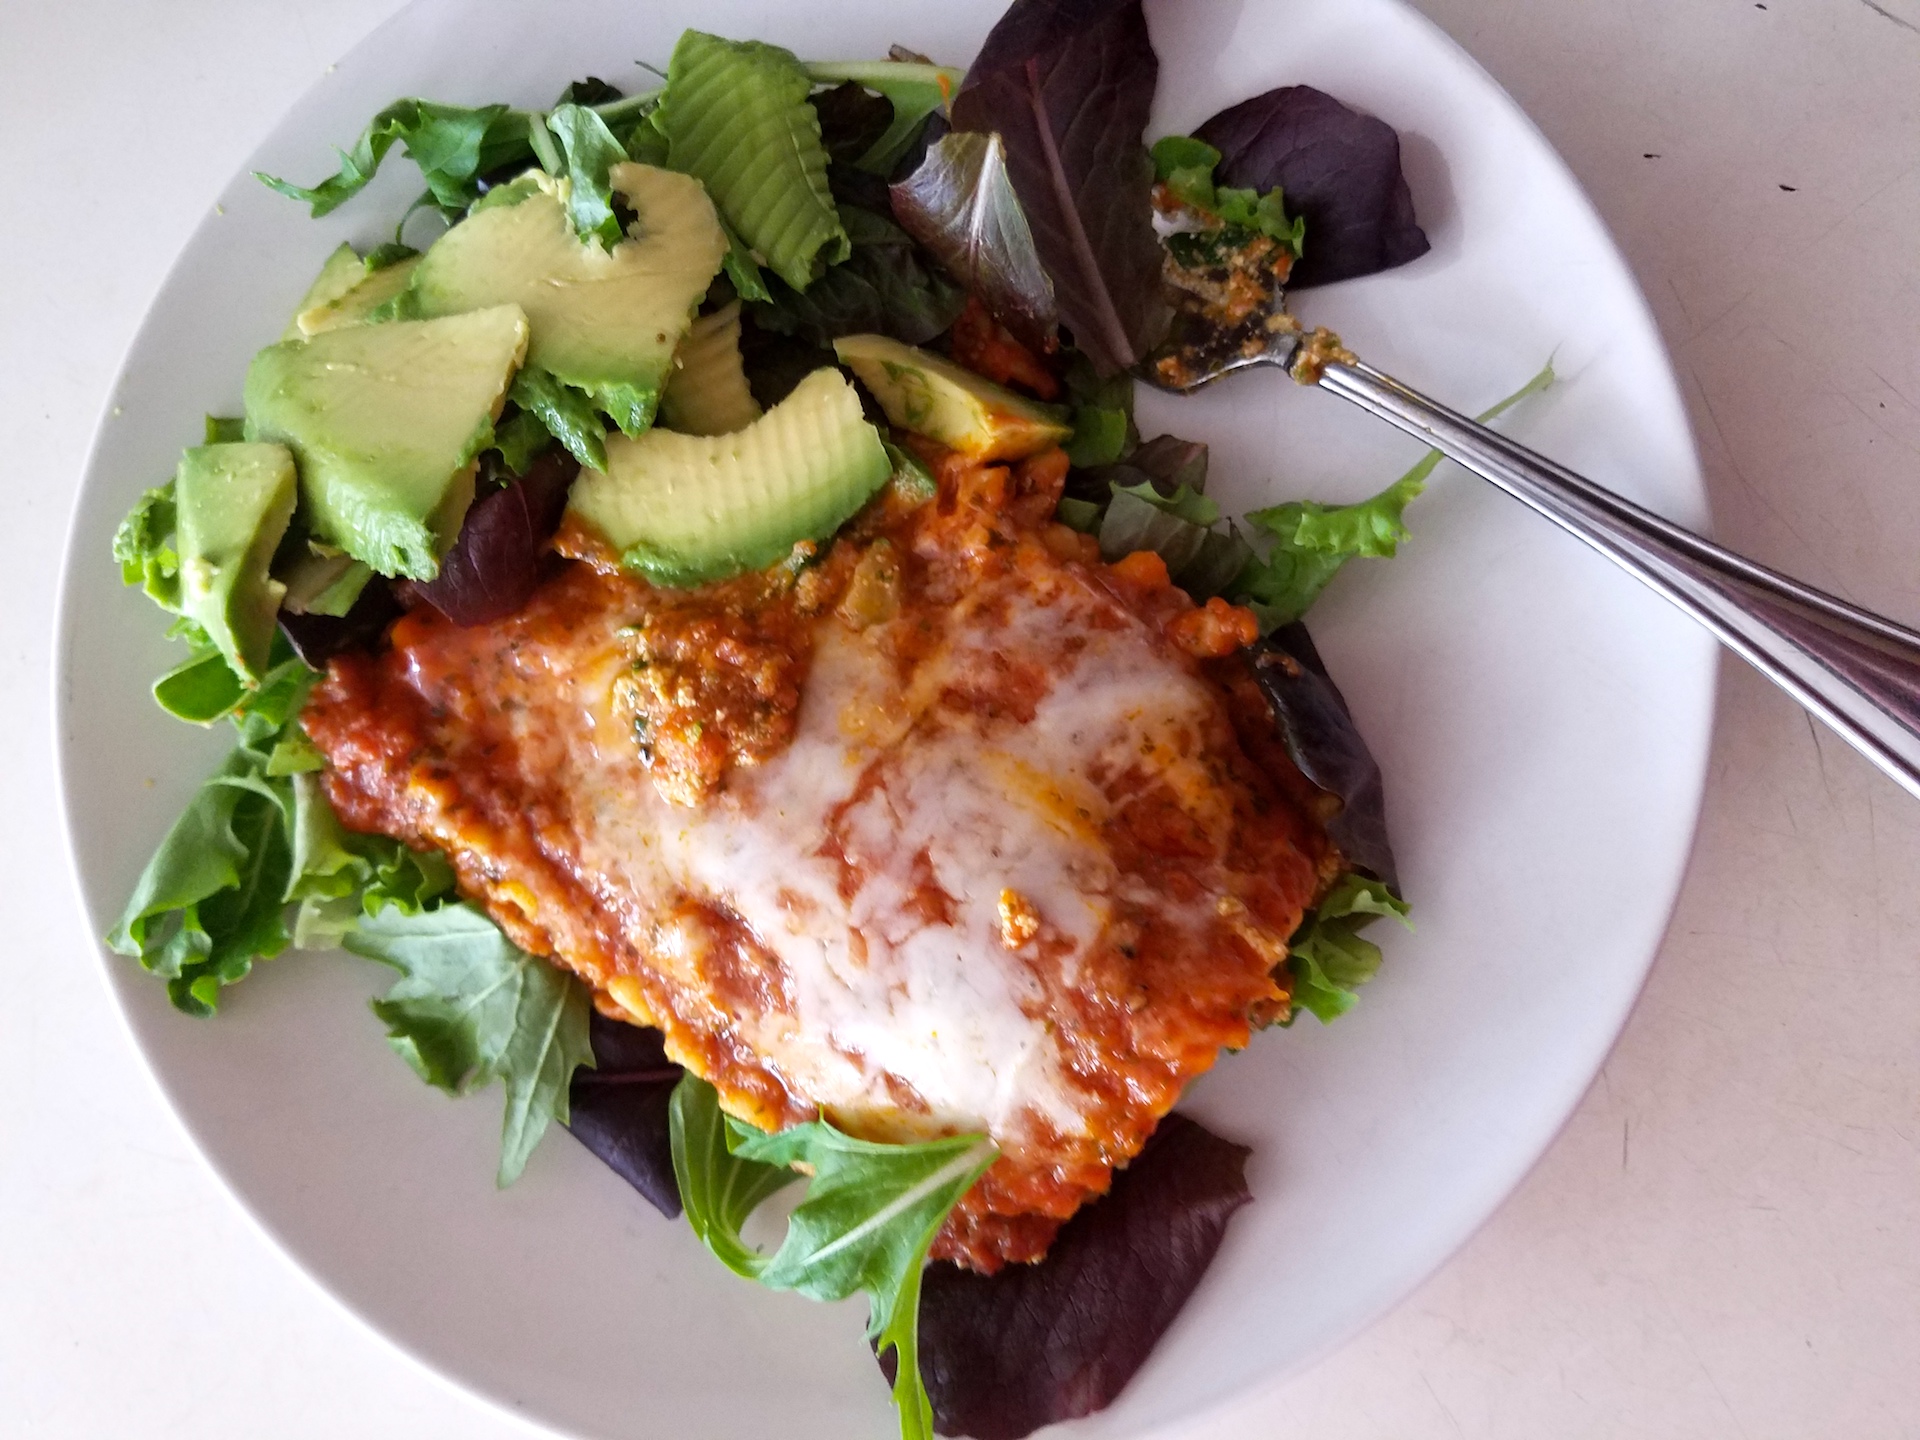 Amy's veggie lasagna on a bed of lettuce with avocado.